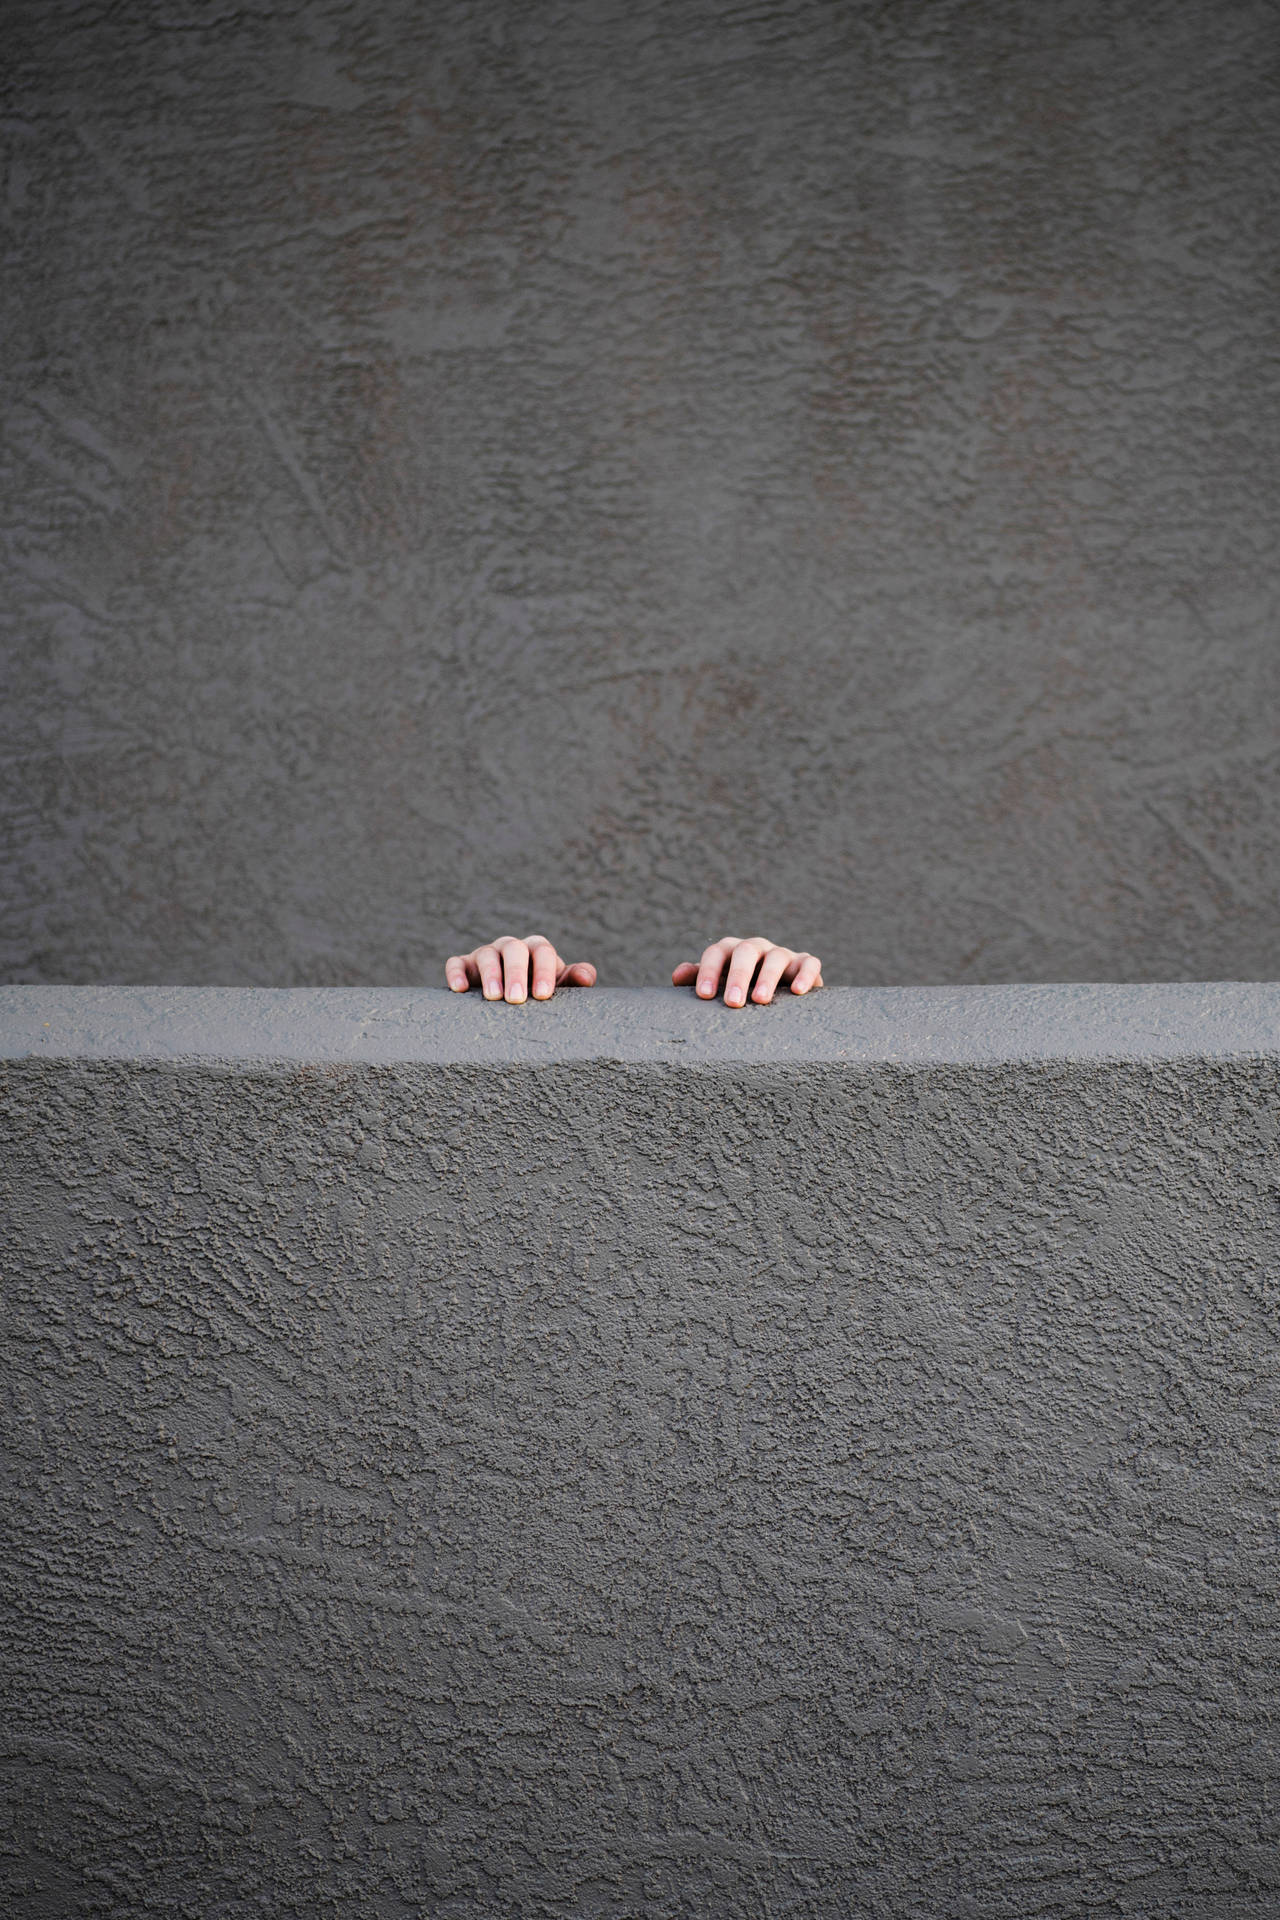 Minimalist Concrete Wall With Hands Hd